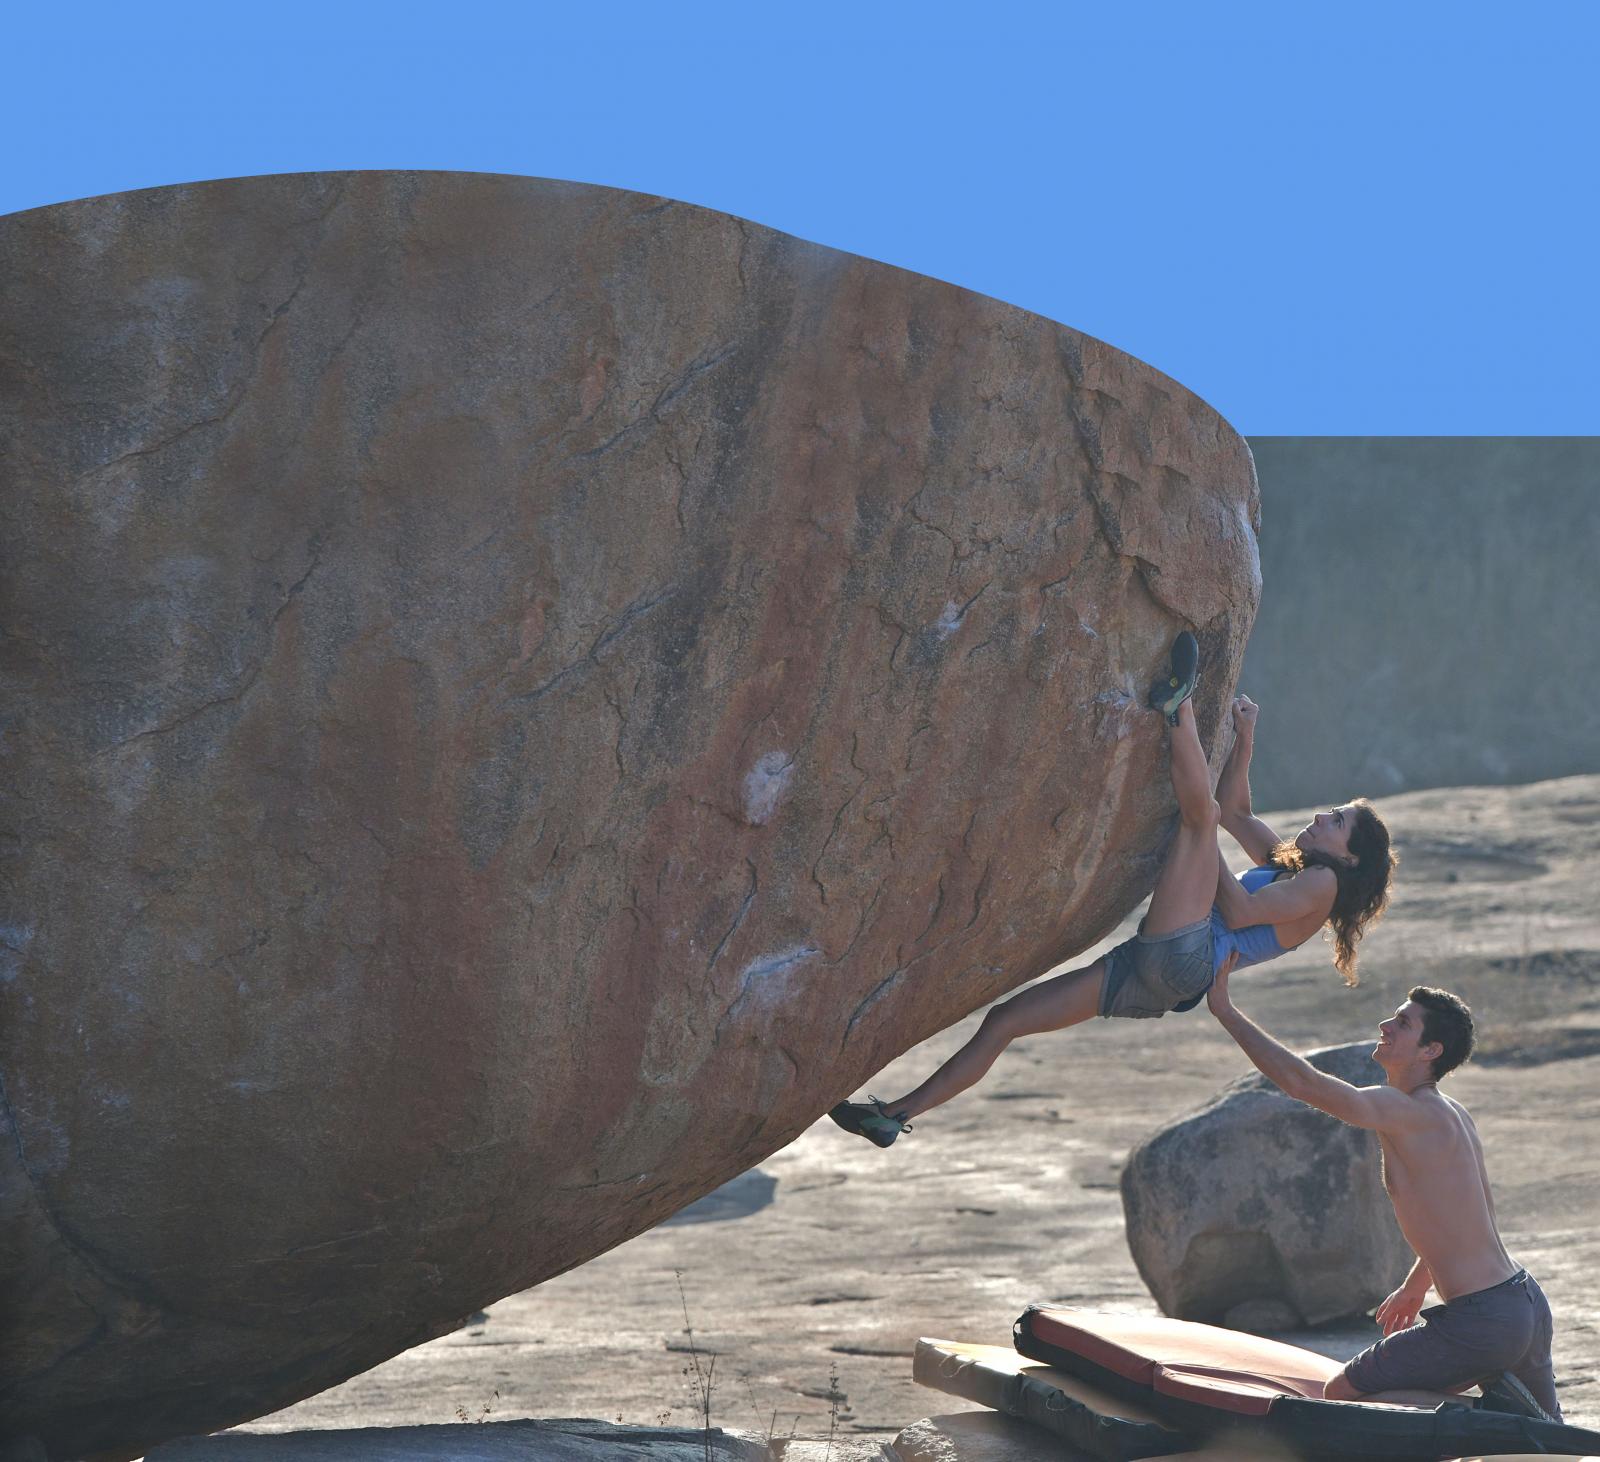 You see boulders everywhere. An...or climbers all over the world.